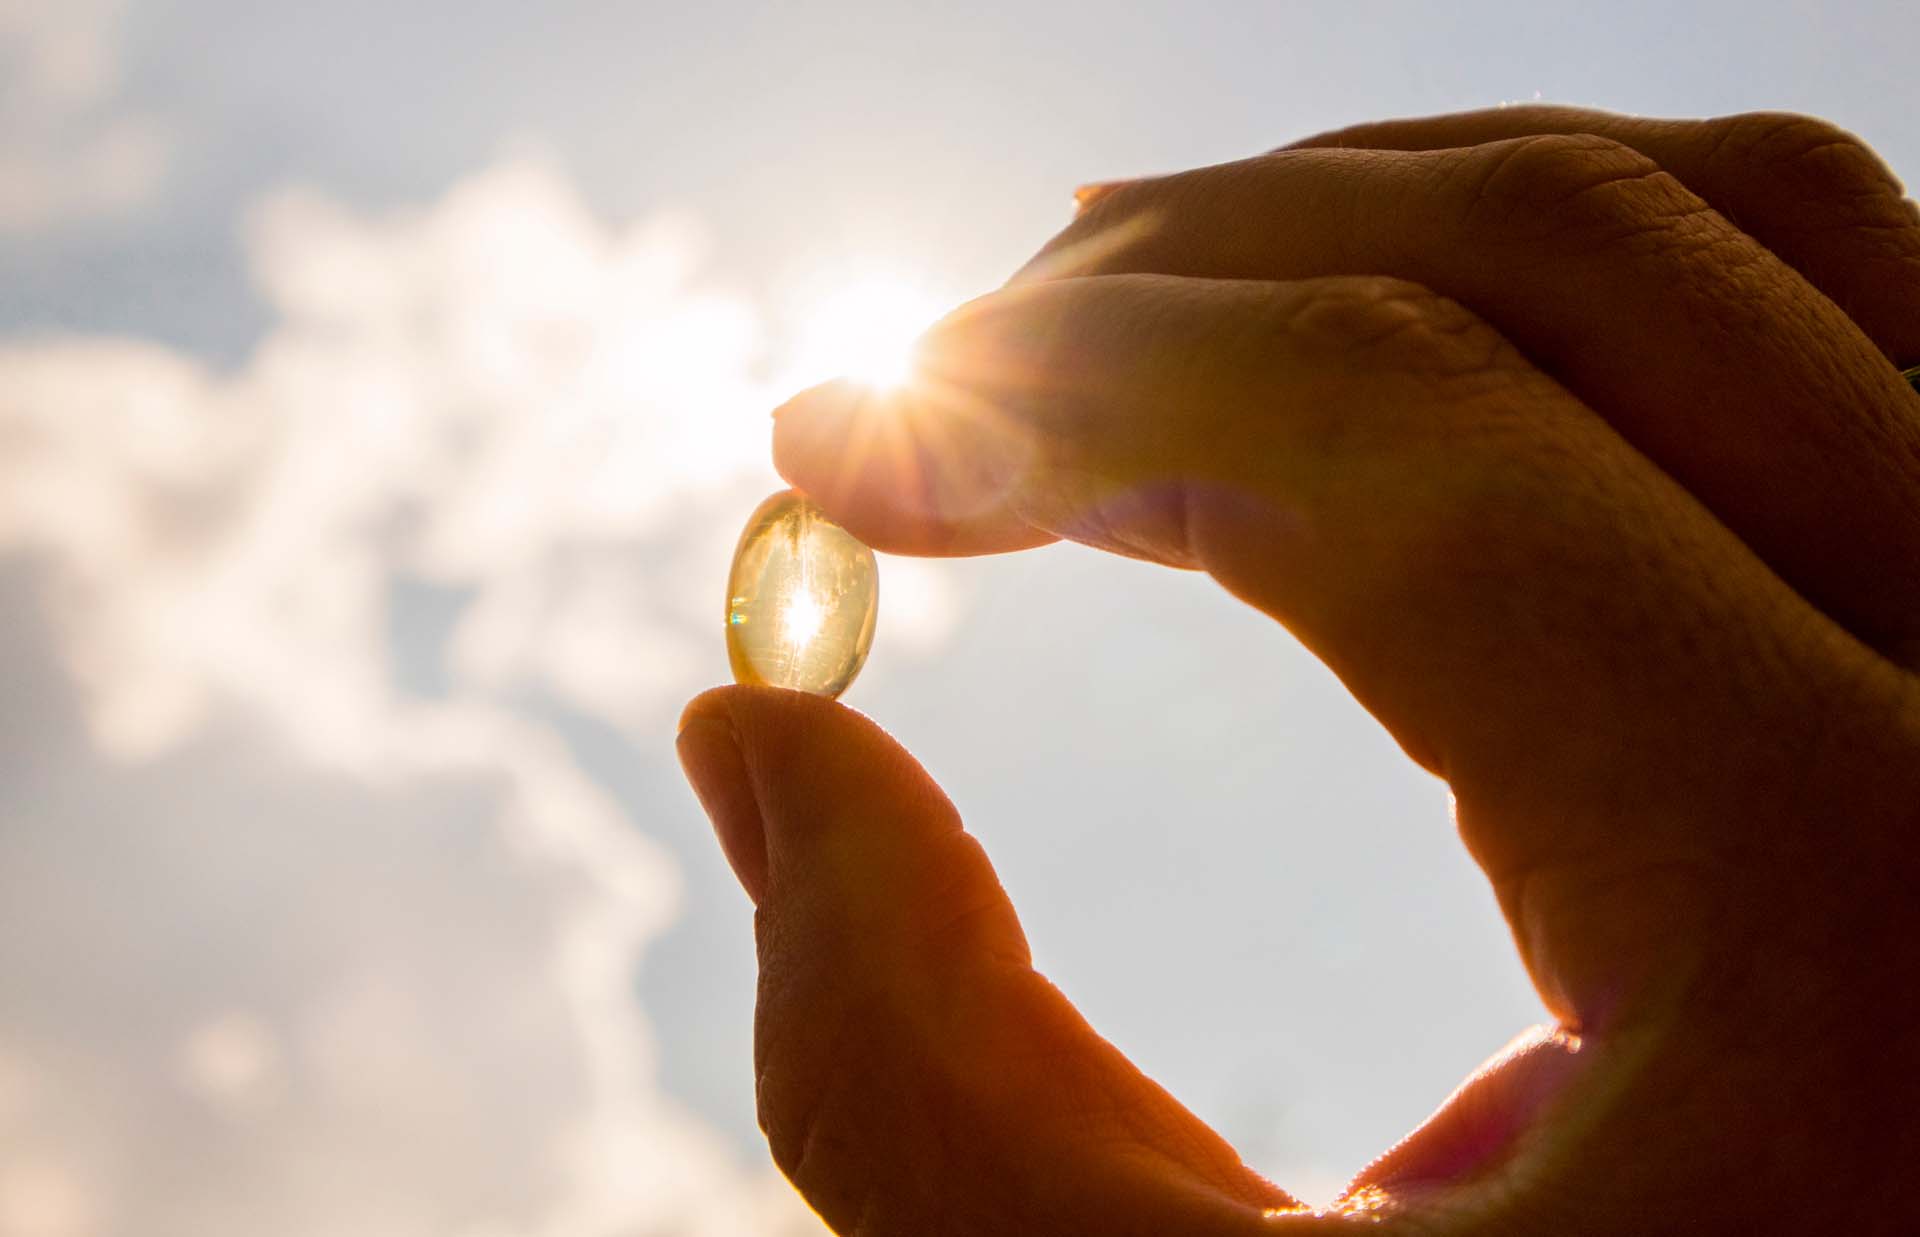 A Vitamin D capsule being held up to the sun between a man's finger and thumb